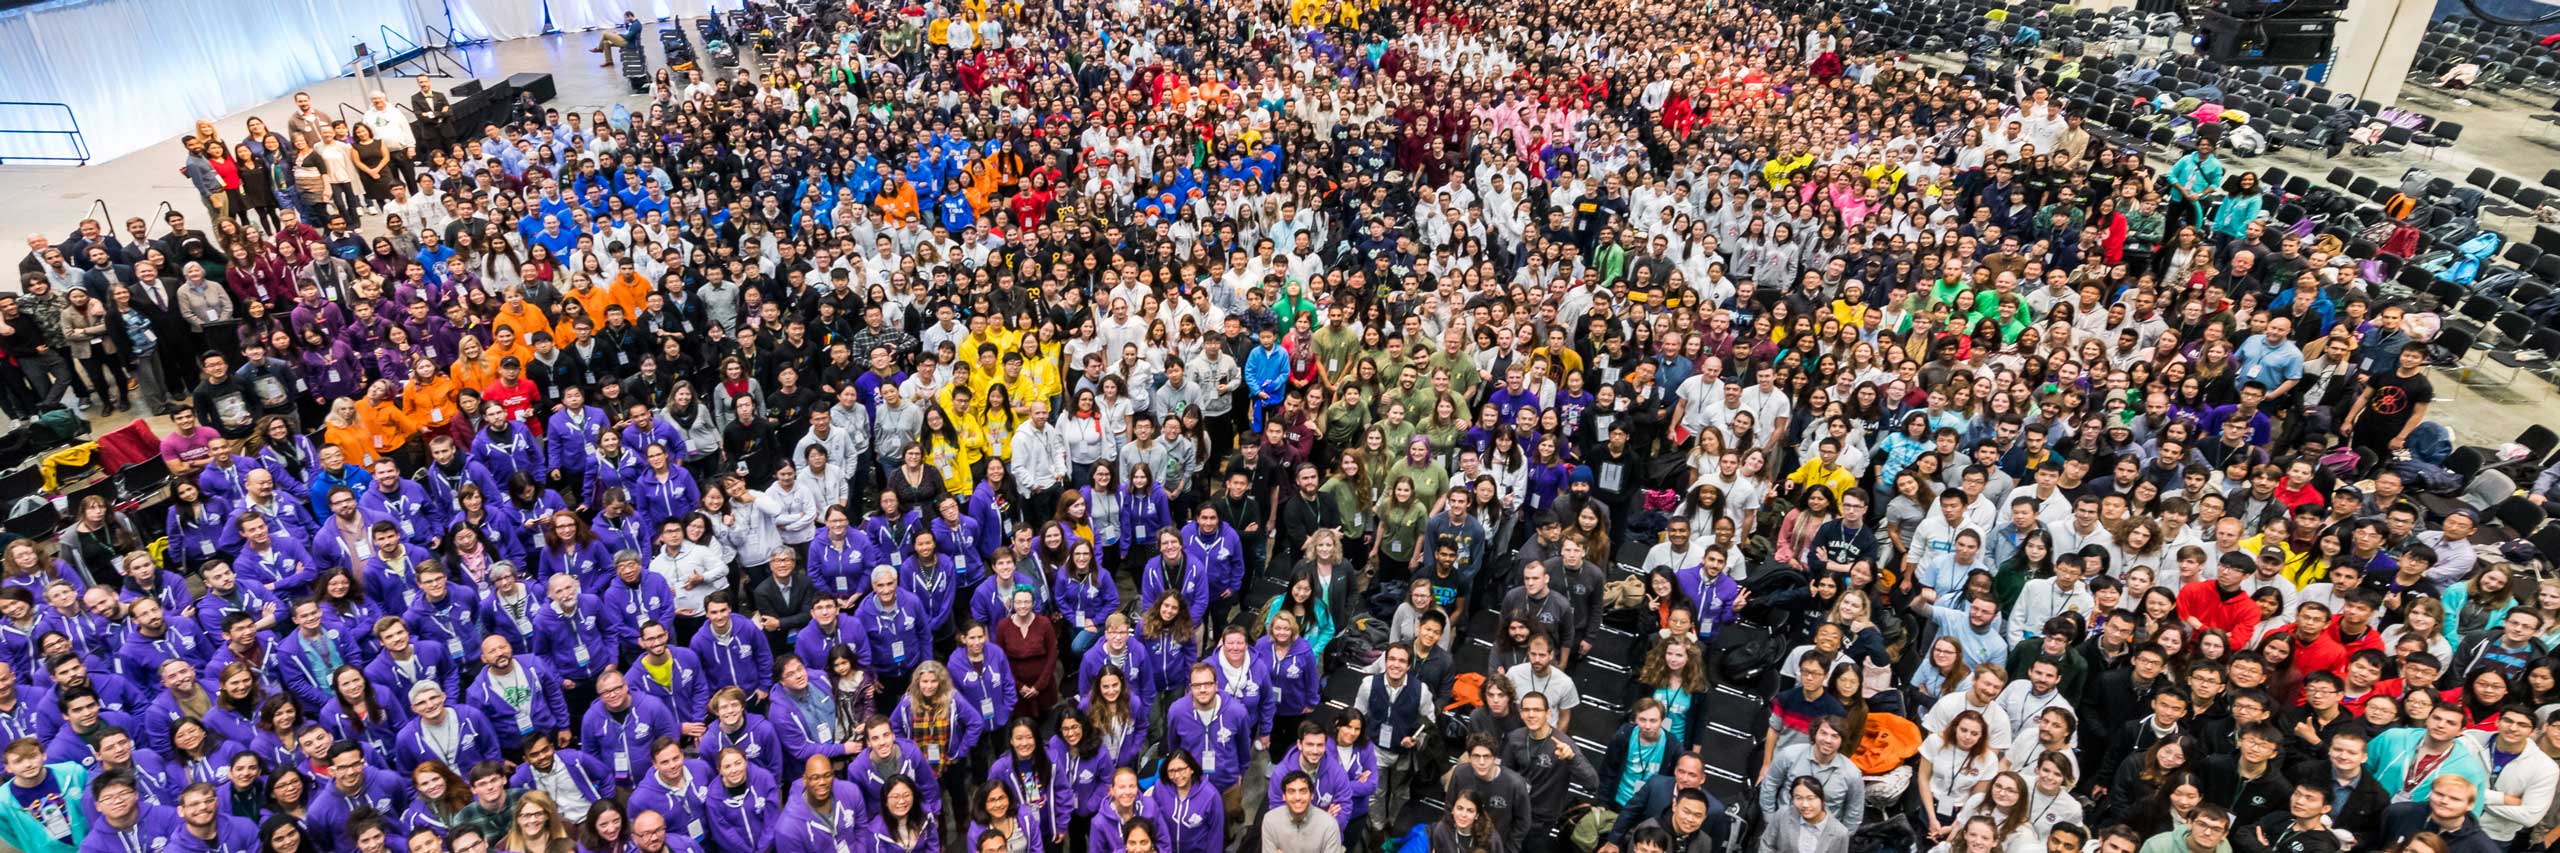 iGEM From Above - thousands of attendees at the 2018 Giant Jamboree